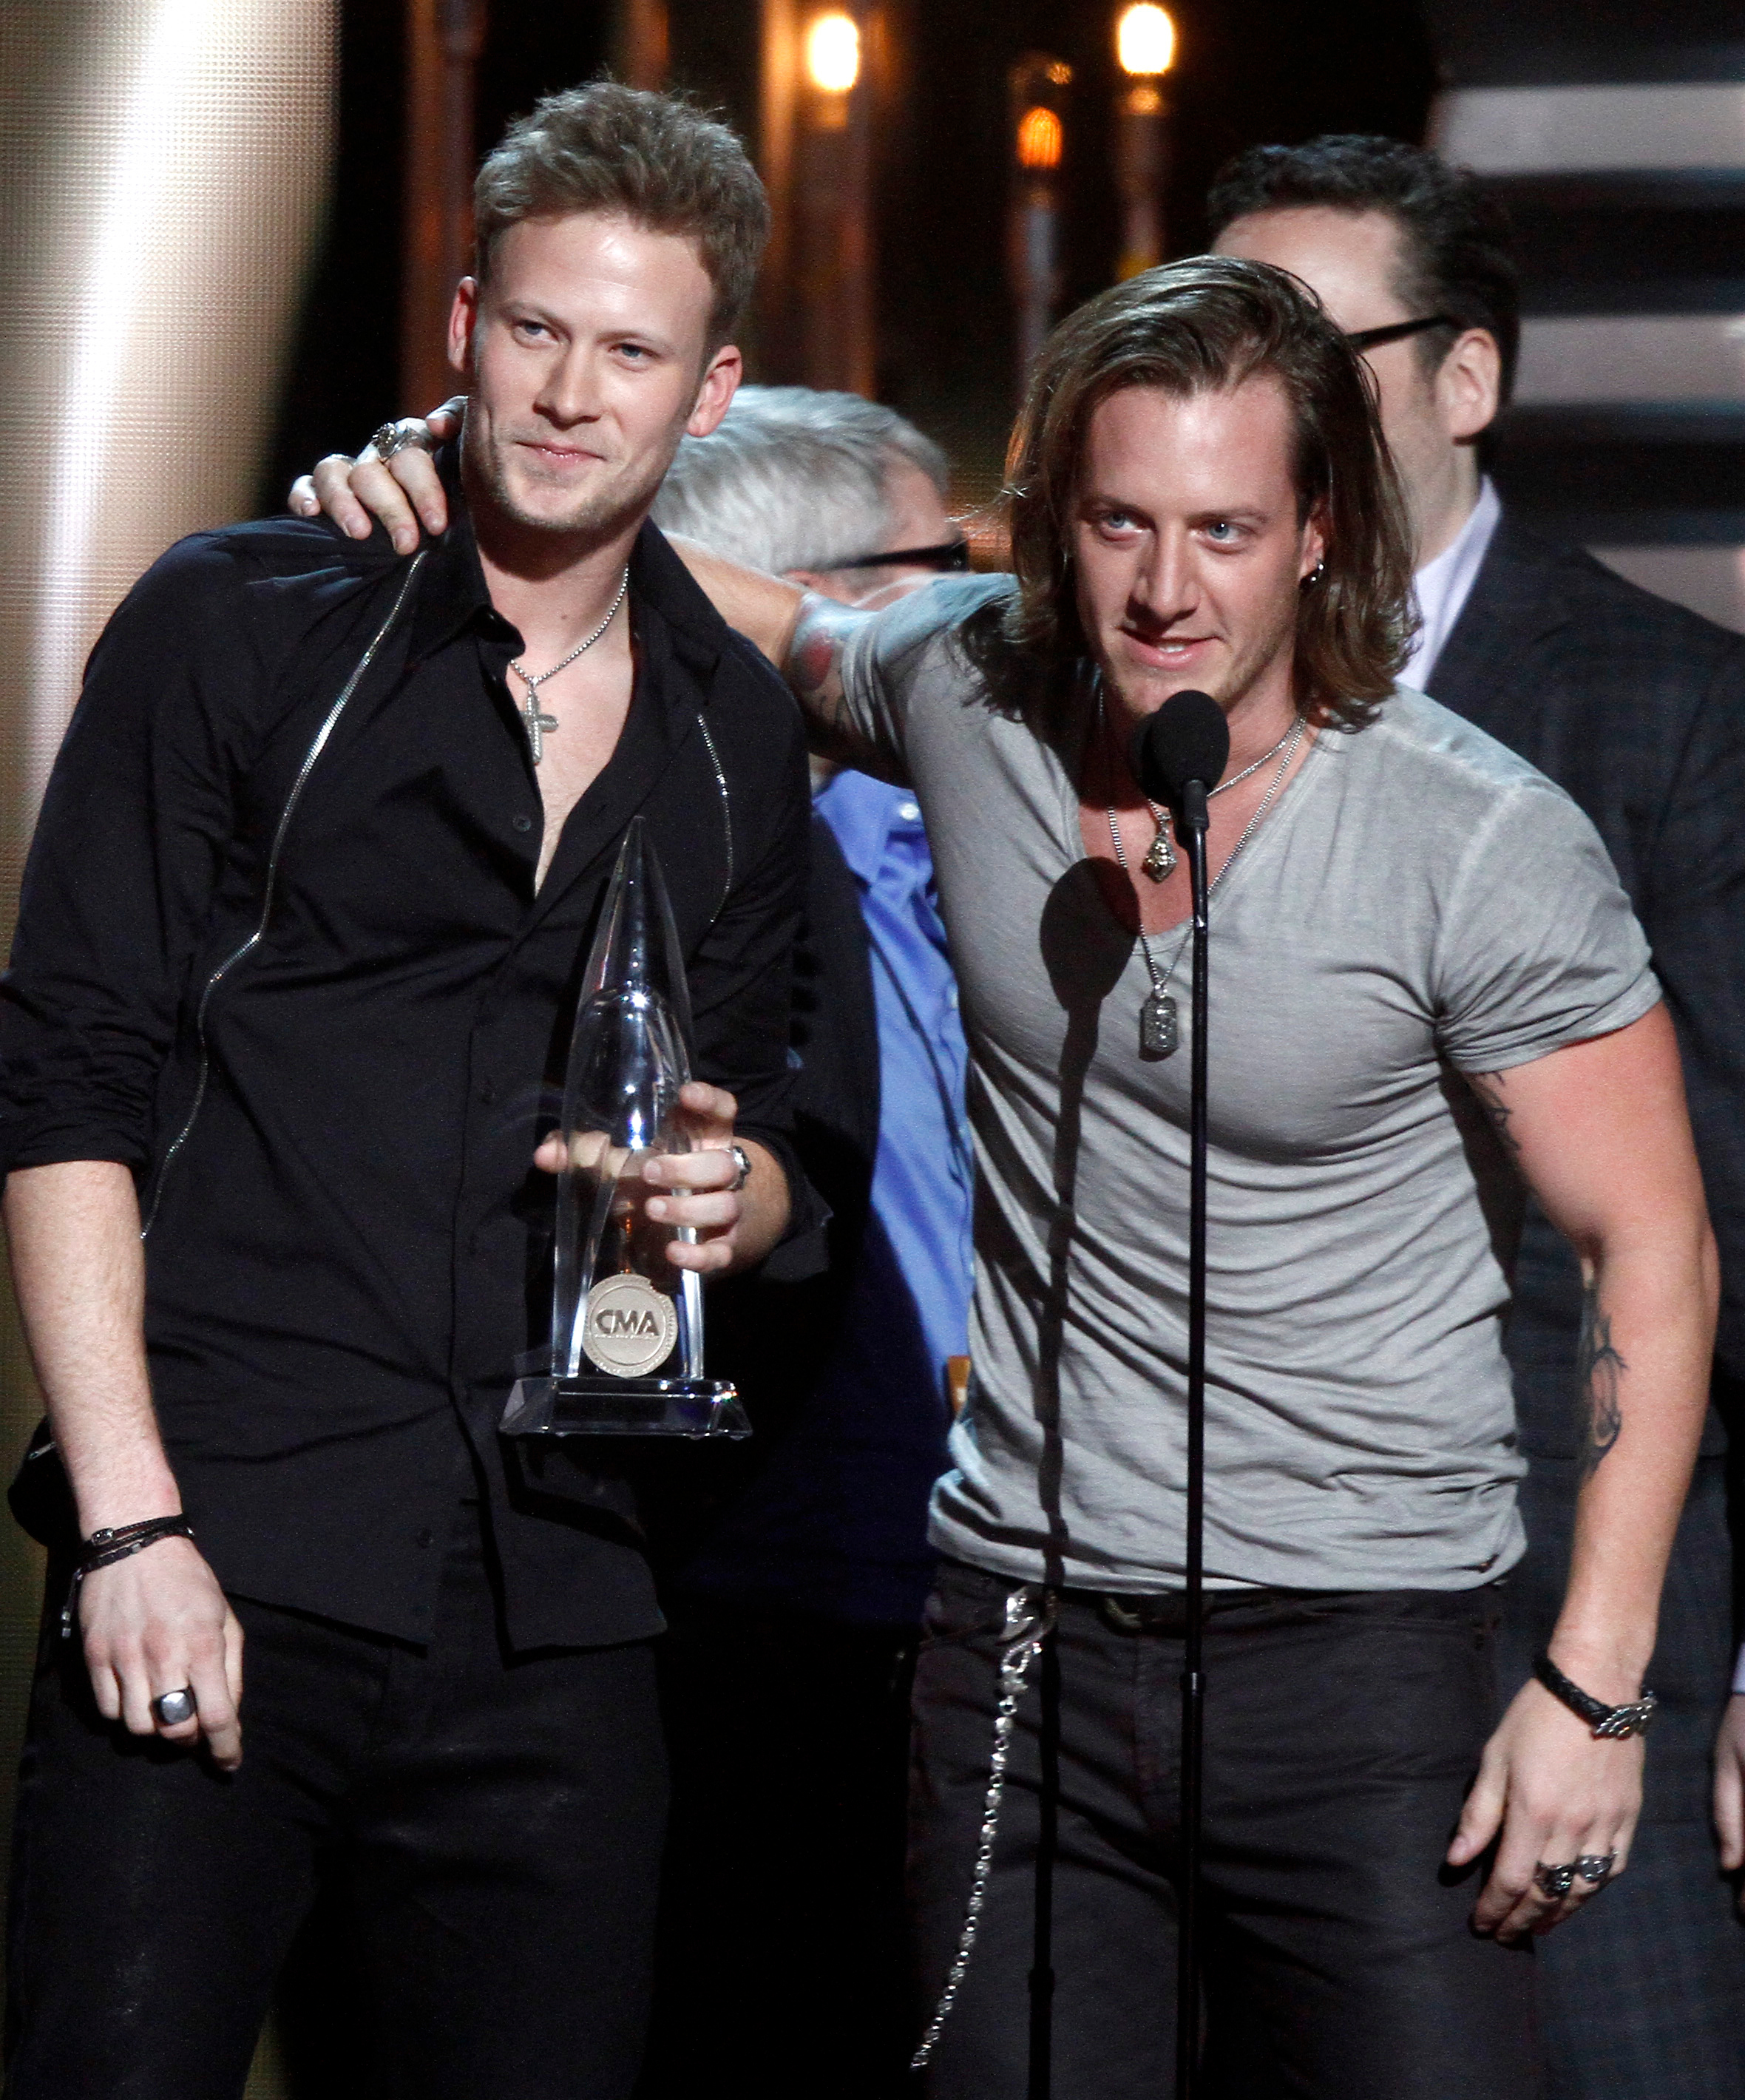 What's buzzing at the 2013 CMA Awards | Gallery | Wonderwall.com